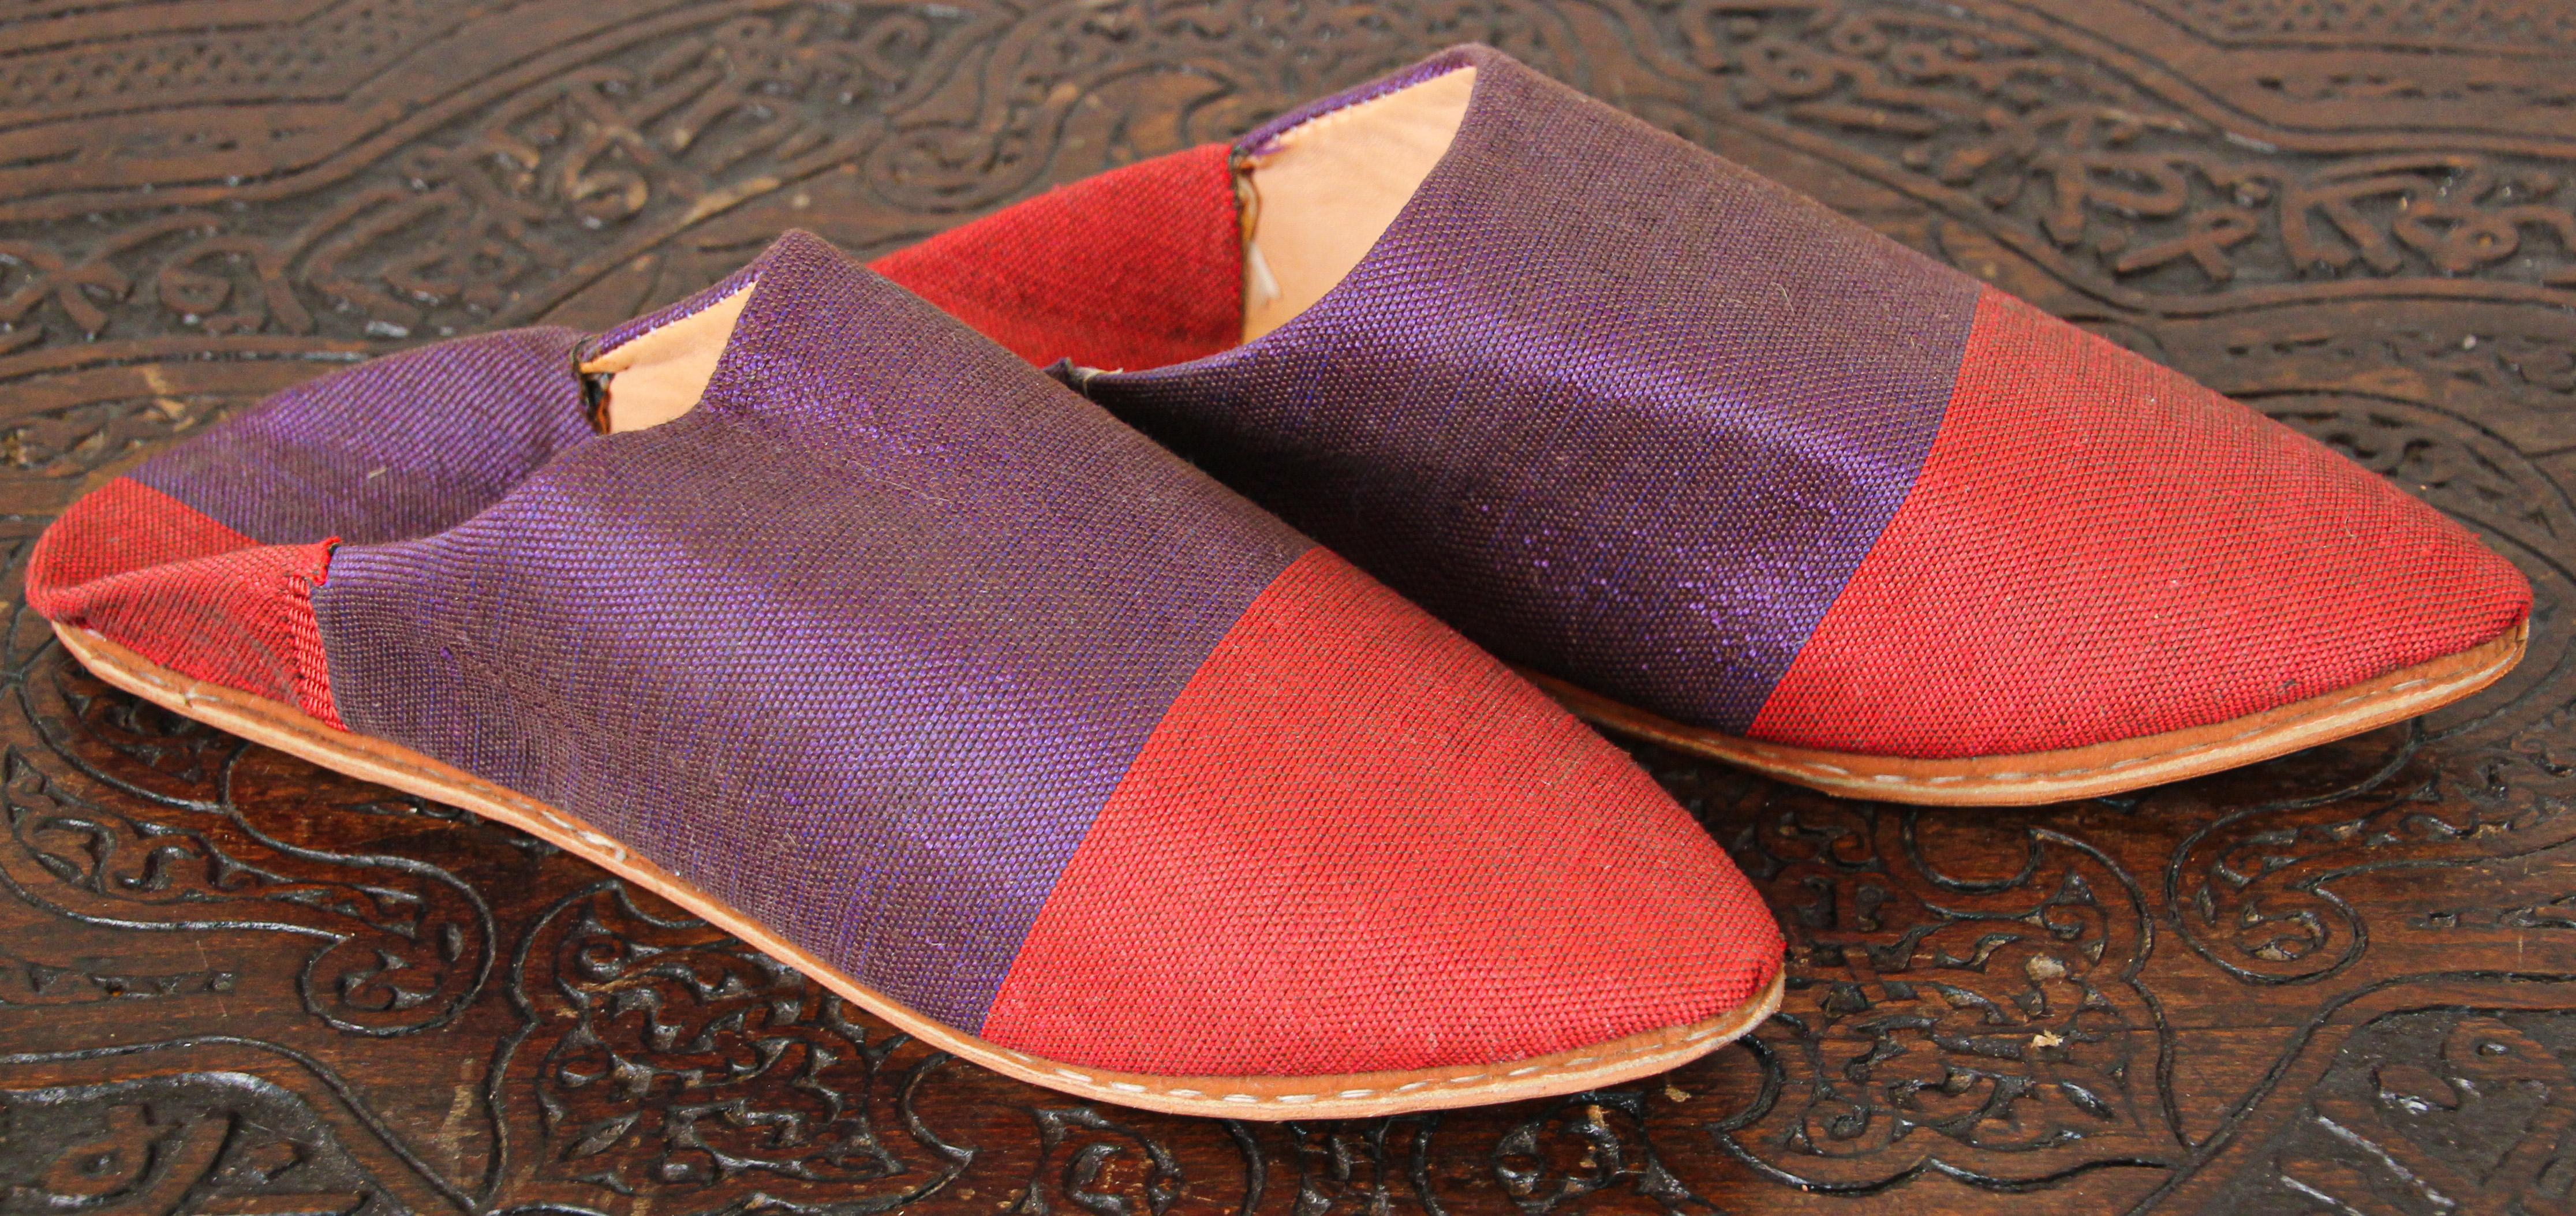 These Moroccan silk slippers are handmade to perfection the inside sole is crafted of soft leather.
hand-sewn leather sole.
You won't want to take the Moroccan babouches off your feet!
Moroccan slippers to wear around the pool or at the beach just